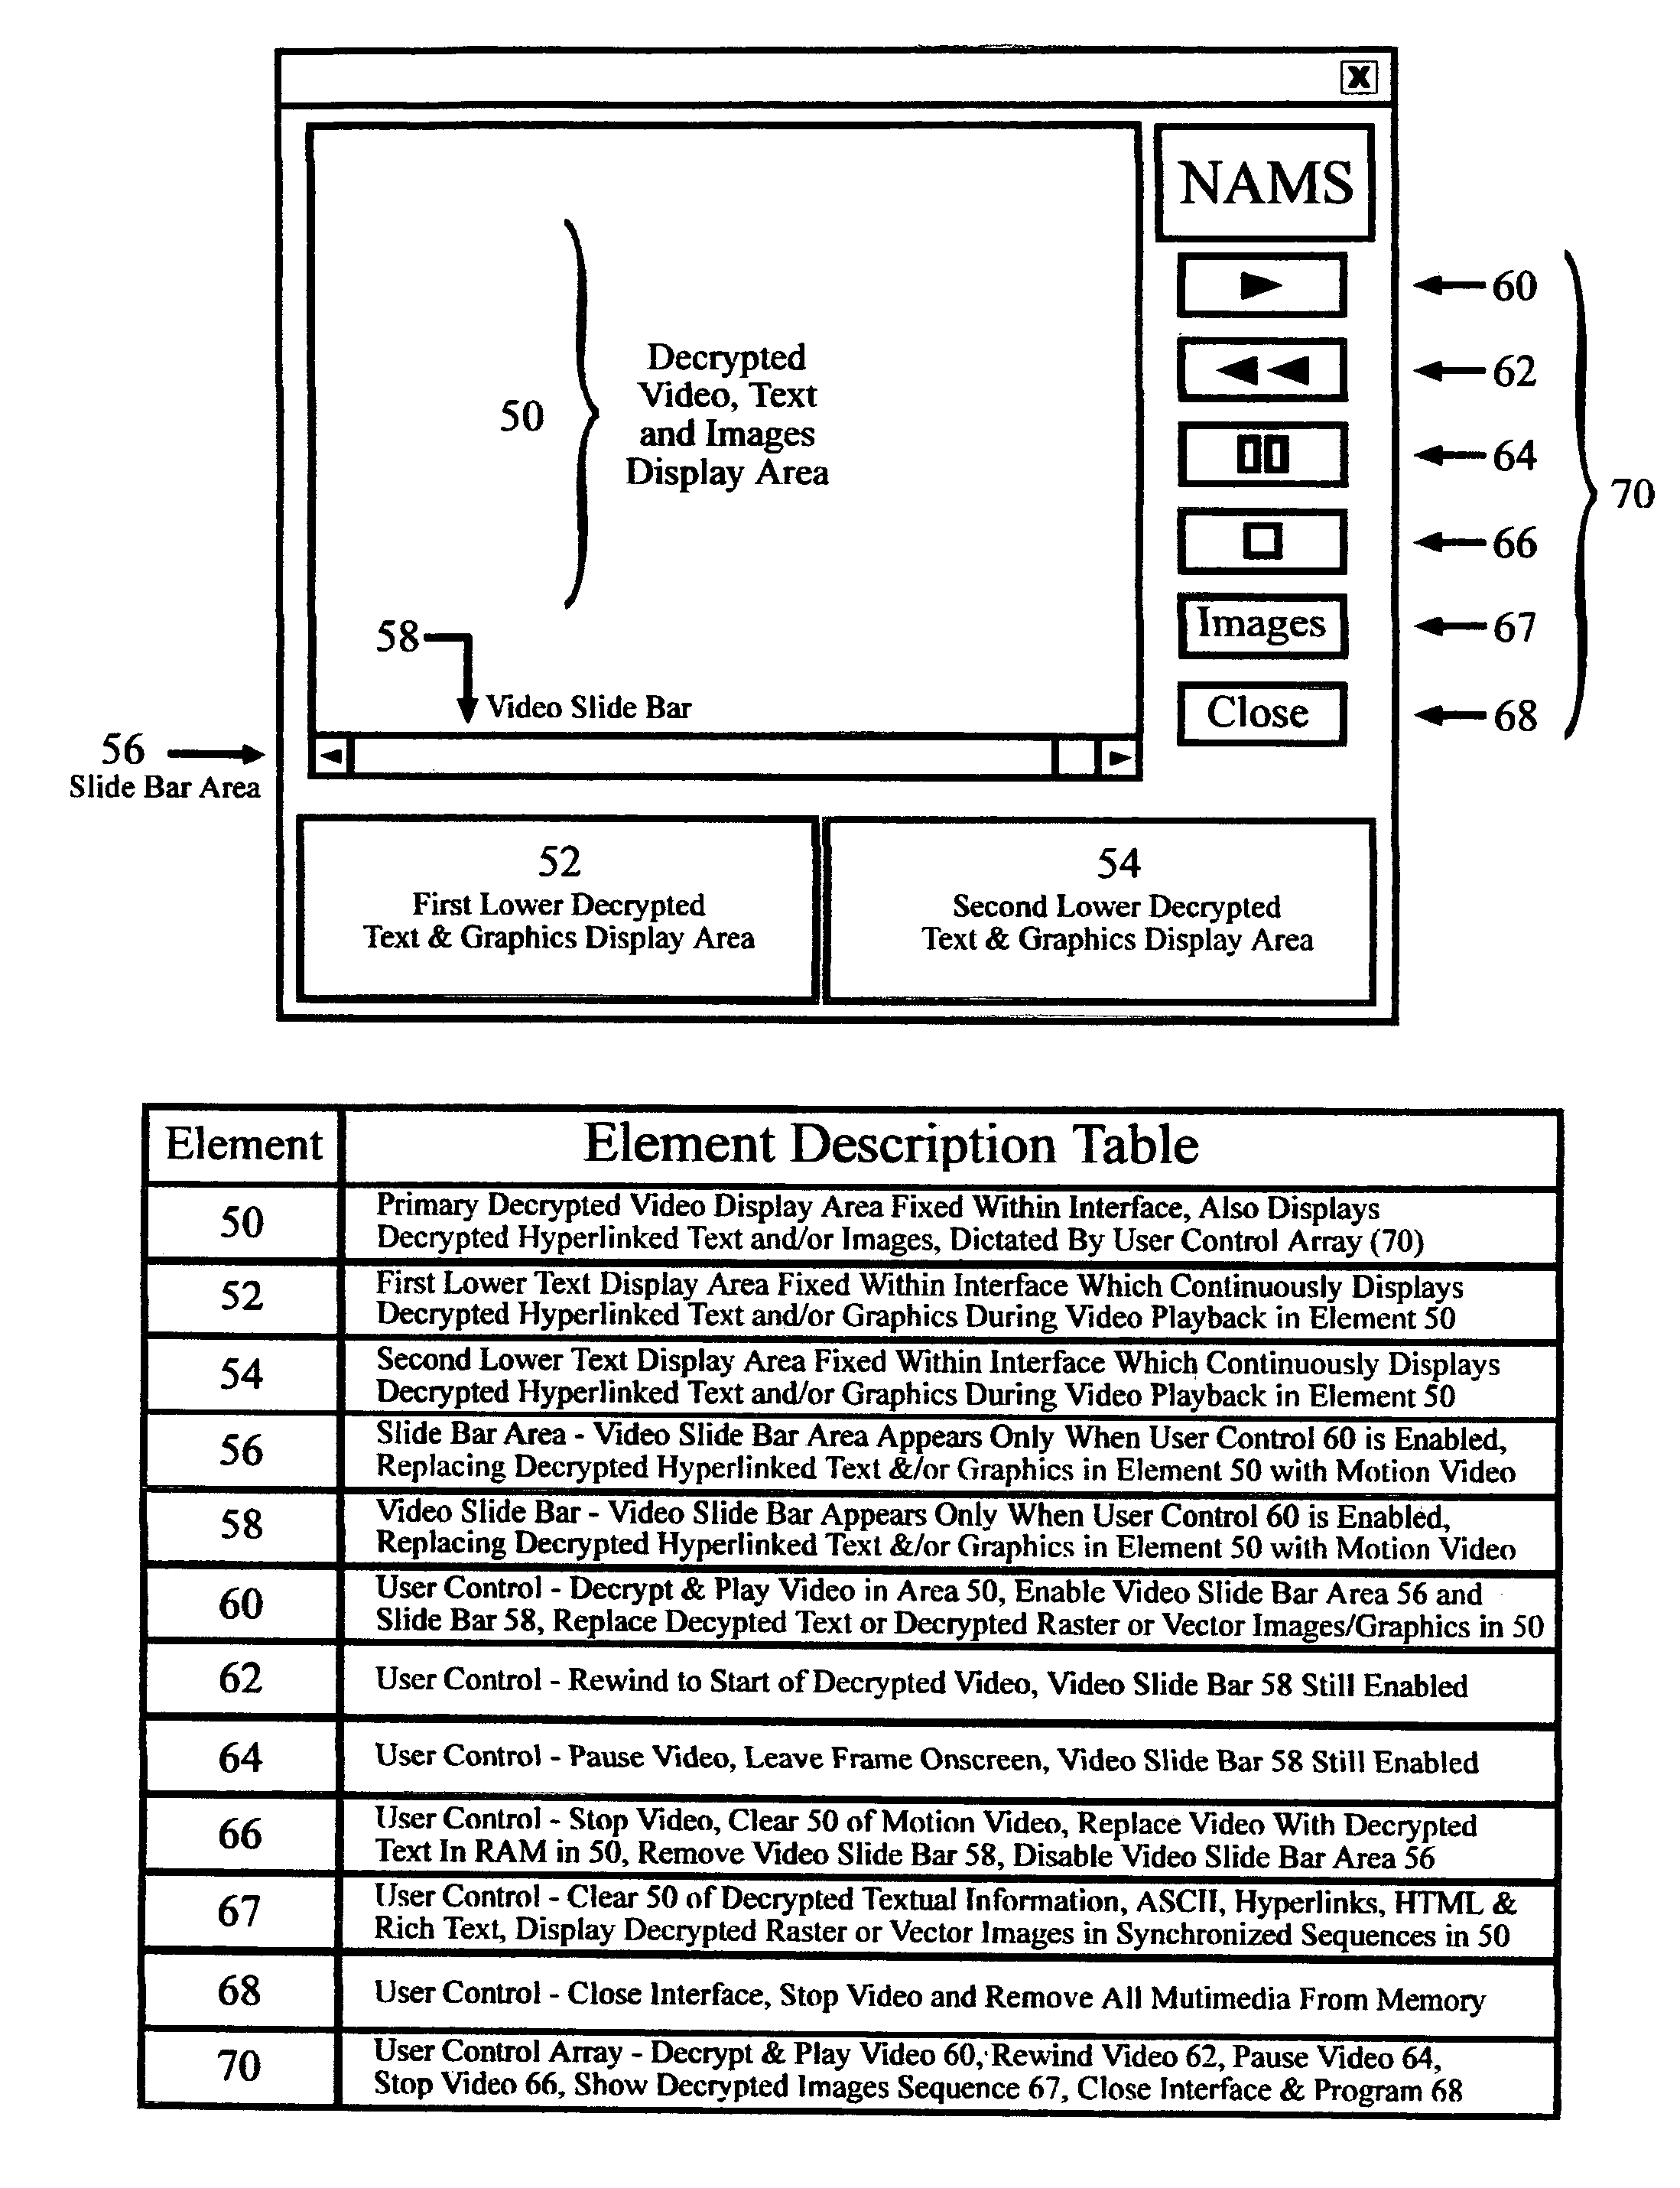 Method and system for providing a secure multimedia presentation